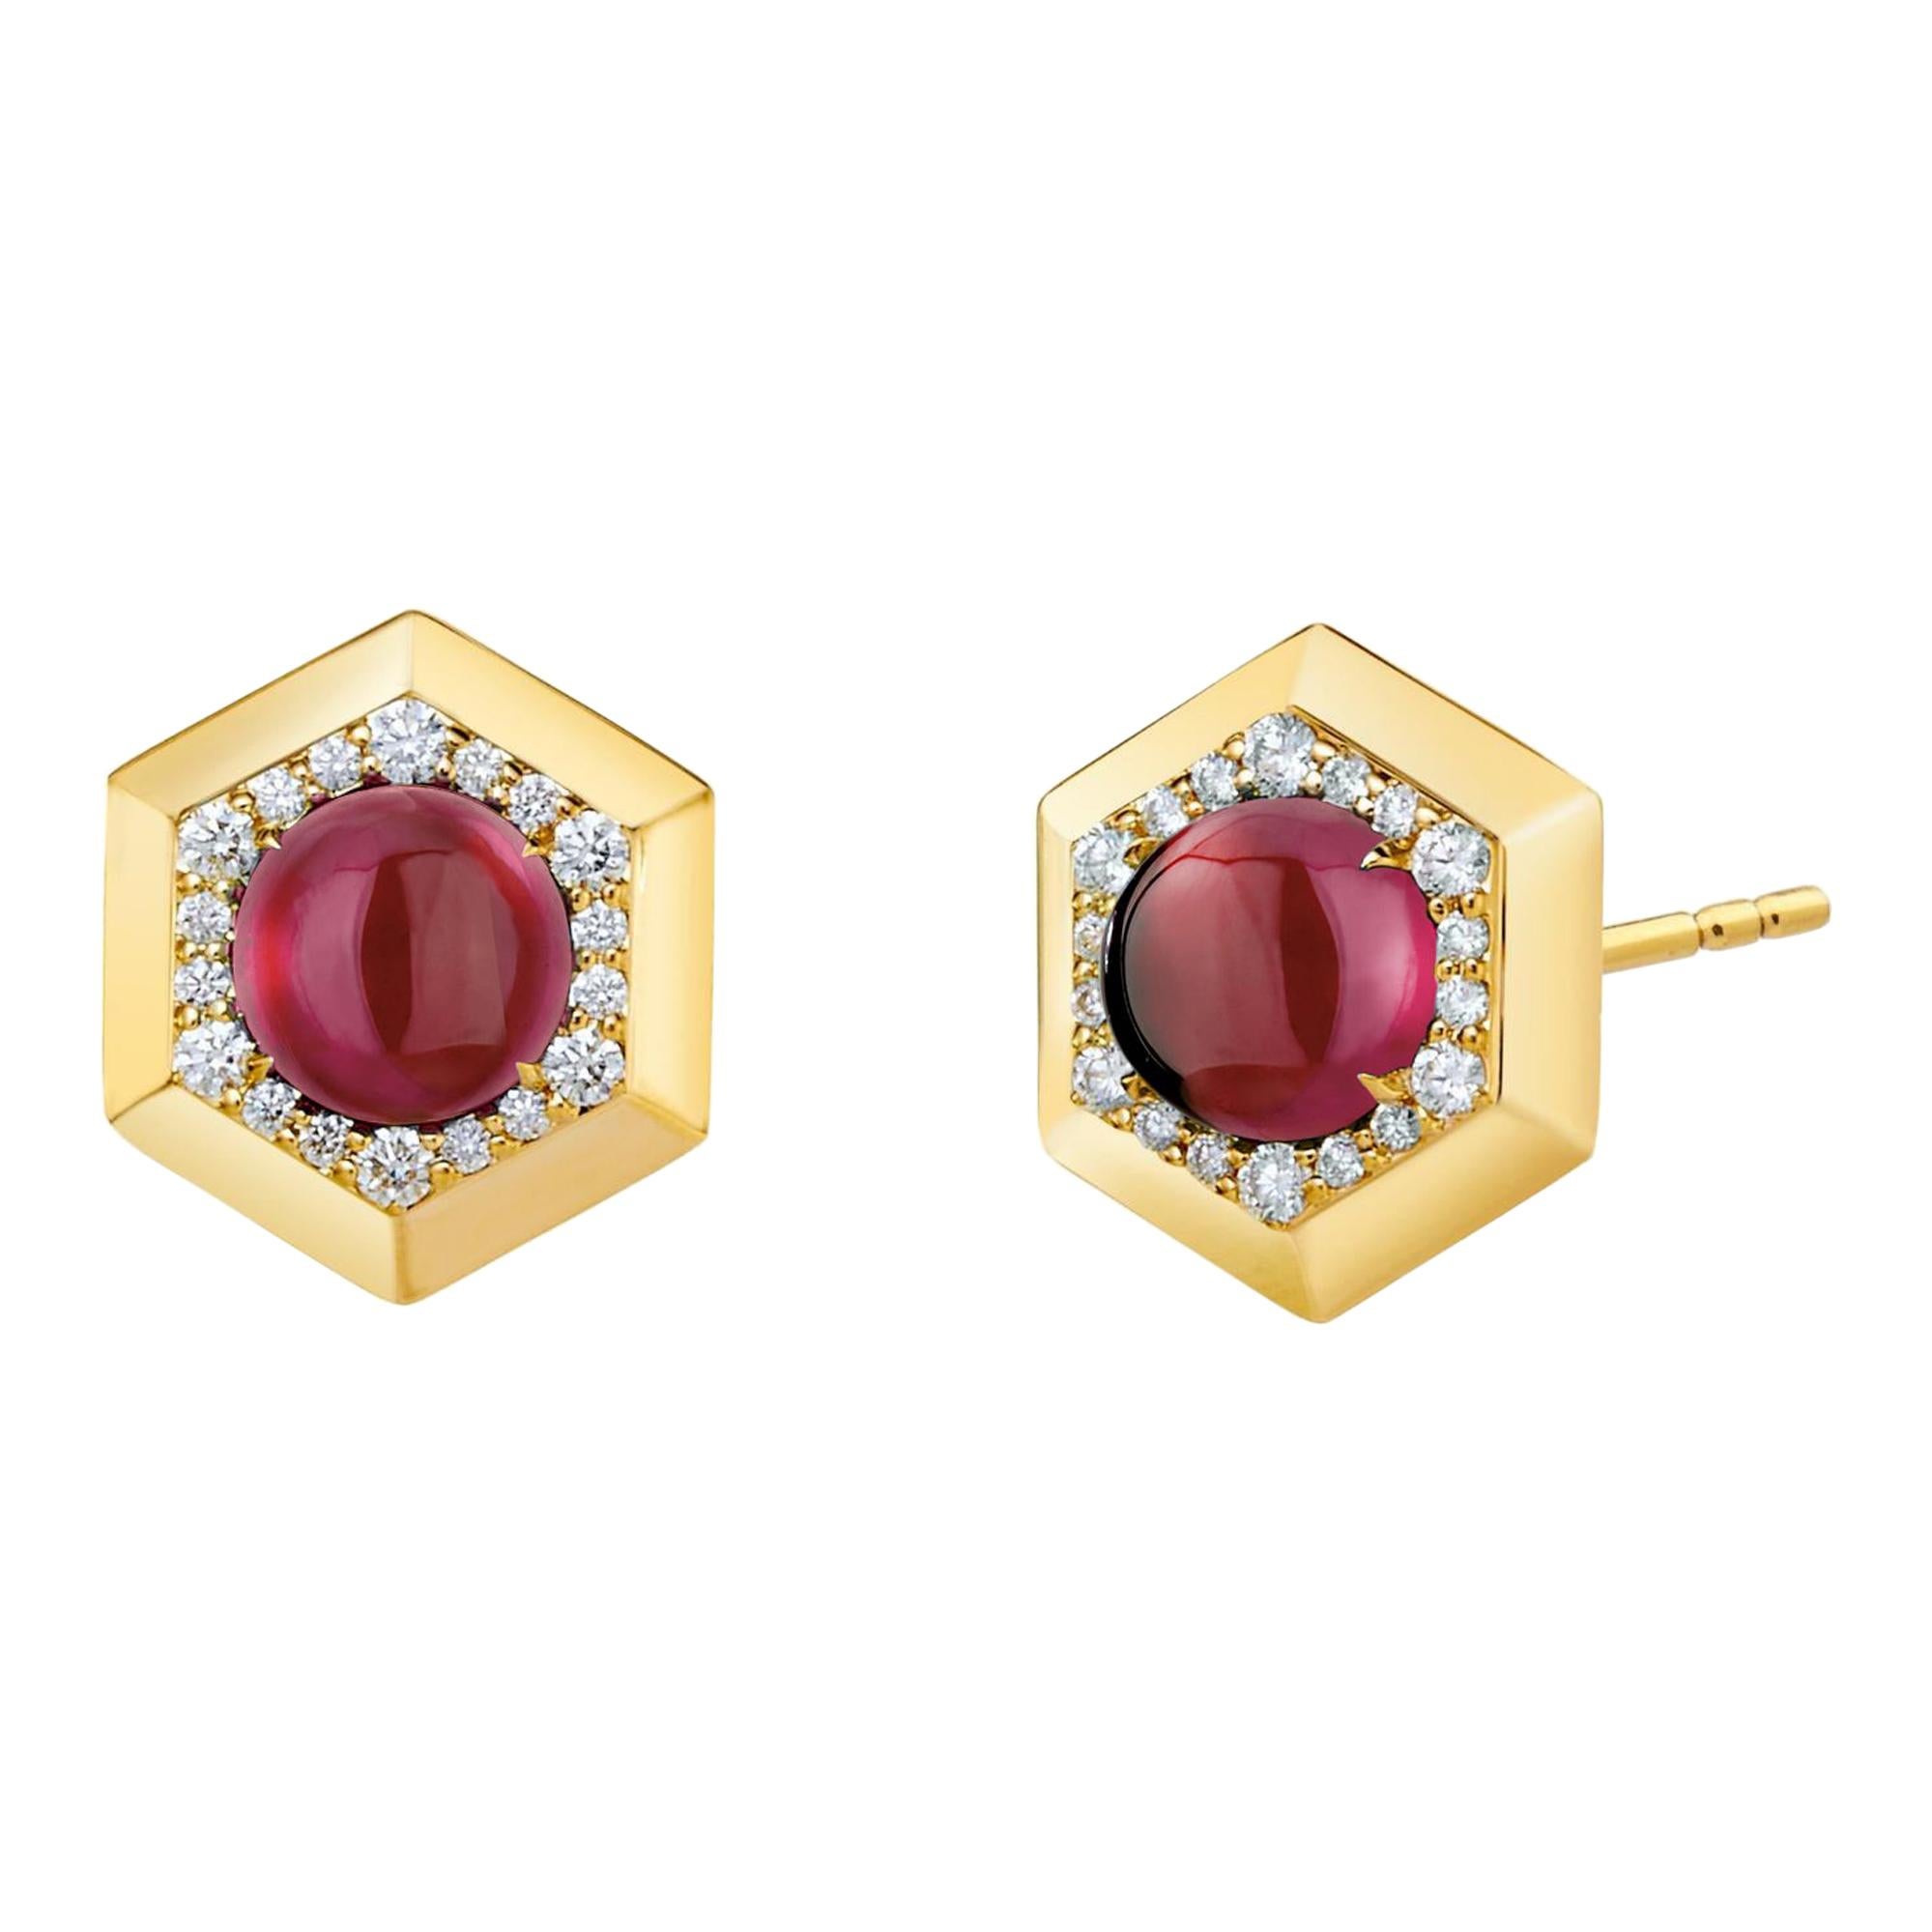 Syna Yellow Gold Hex Earrings with Rhodolite Garnet and Diamonds